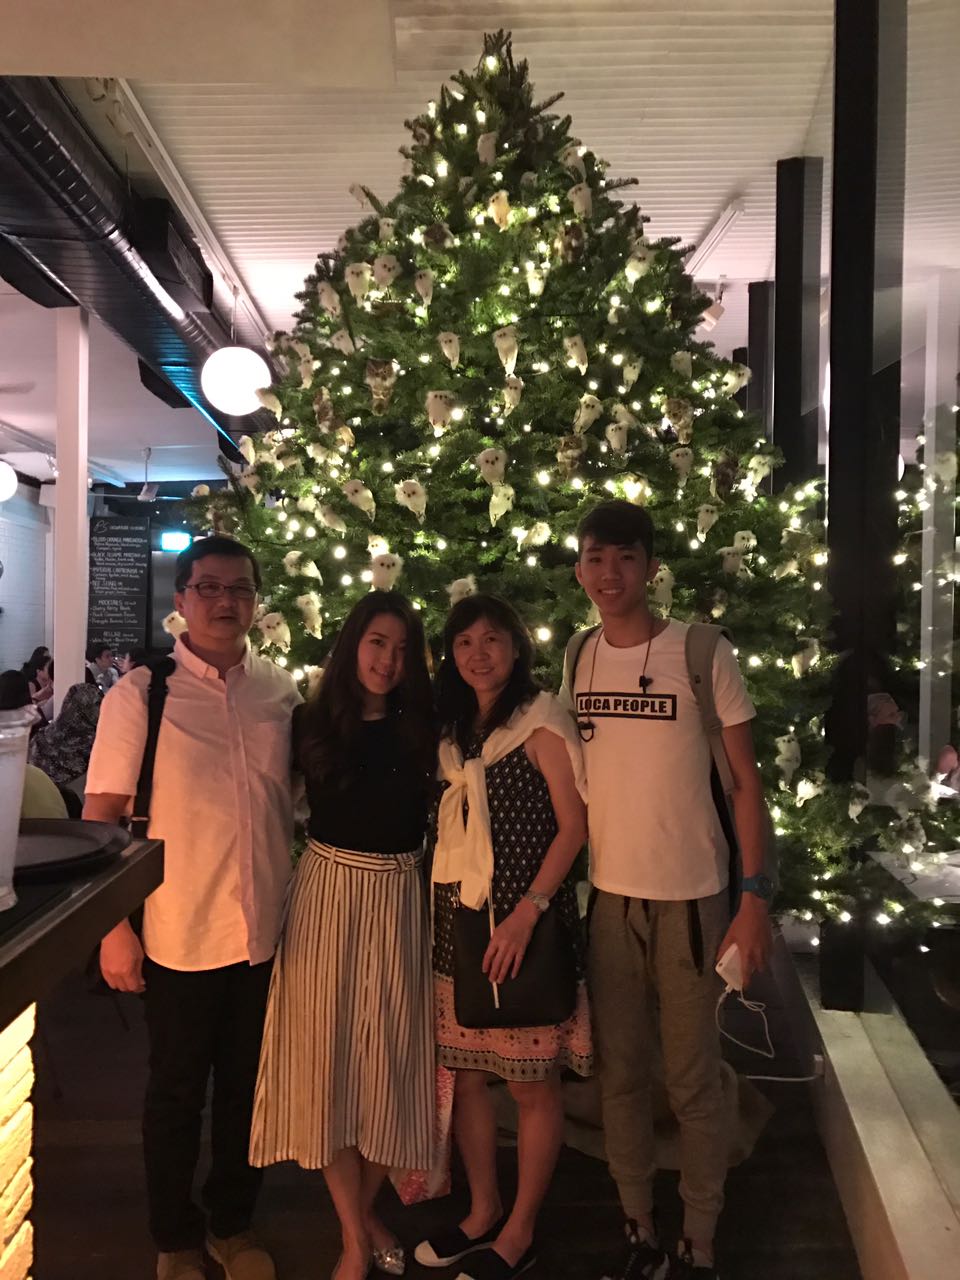 From May Hew and family in Singapore: Merry Christmas to all in District 331, 24 Dec 2016